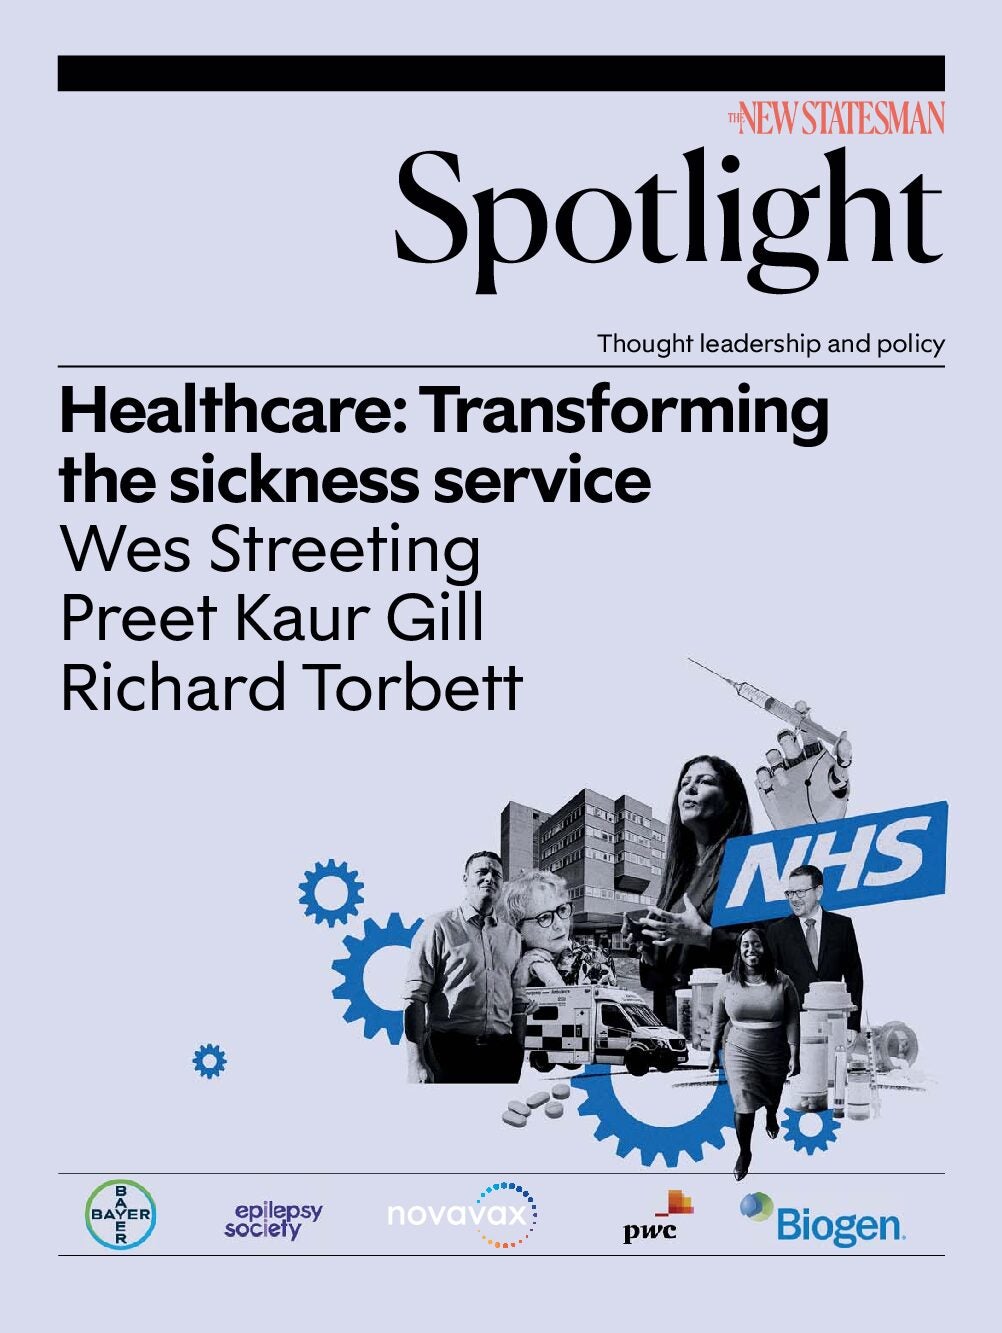 Healthcare: Transforming the sickness service